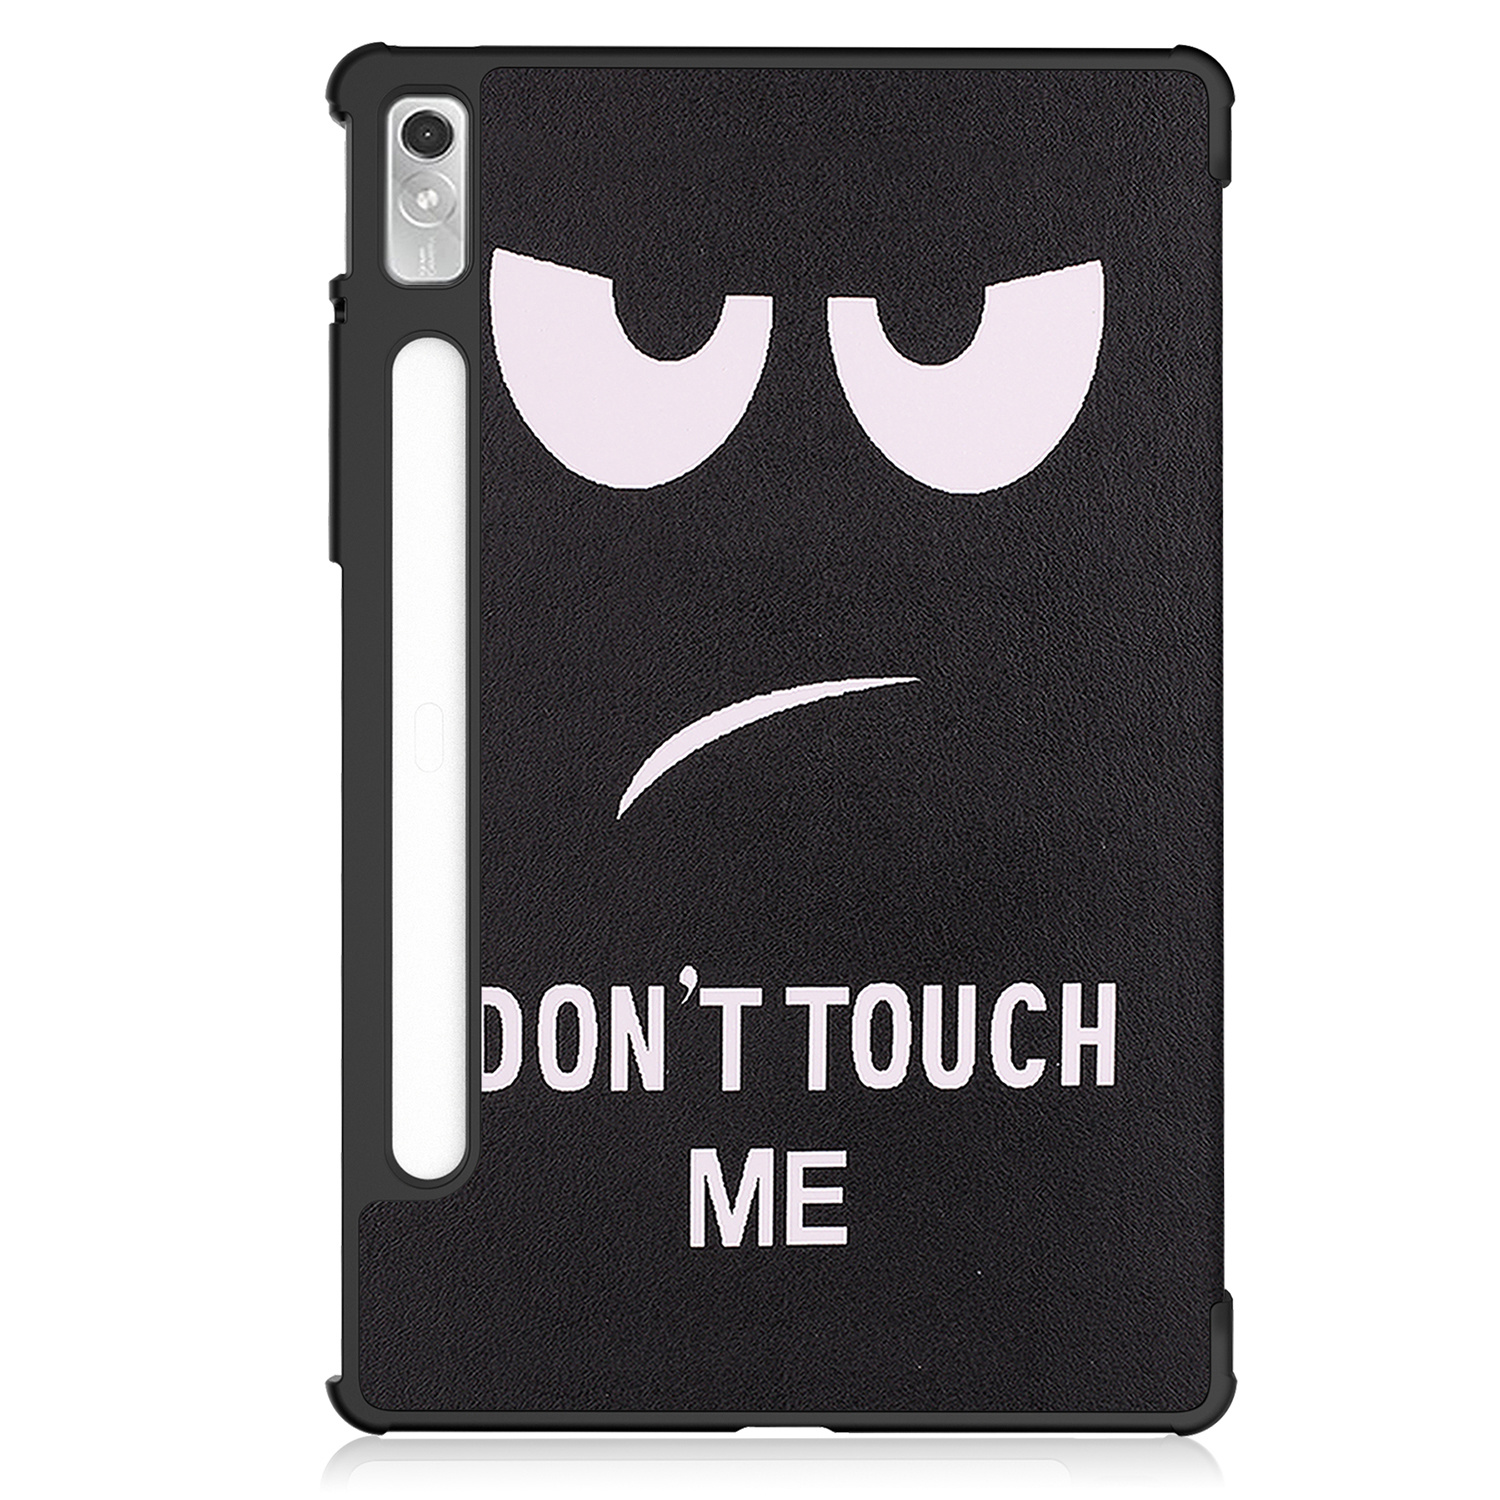 Nomfy Hoes Geschikt voor Lenovo Tab P11 Pro Hoes Tri-fold Tablet Hoesje Case Met Uitsparing Geschikt voor Lenovo Pen - Hoesje Geschikt voor Lenovo Tab P11 Pro Hoesje Hardcover Bookcase - Don't Touch Me